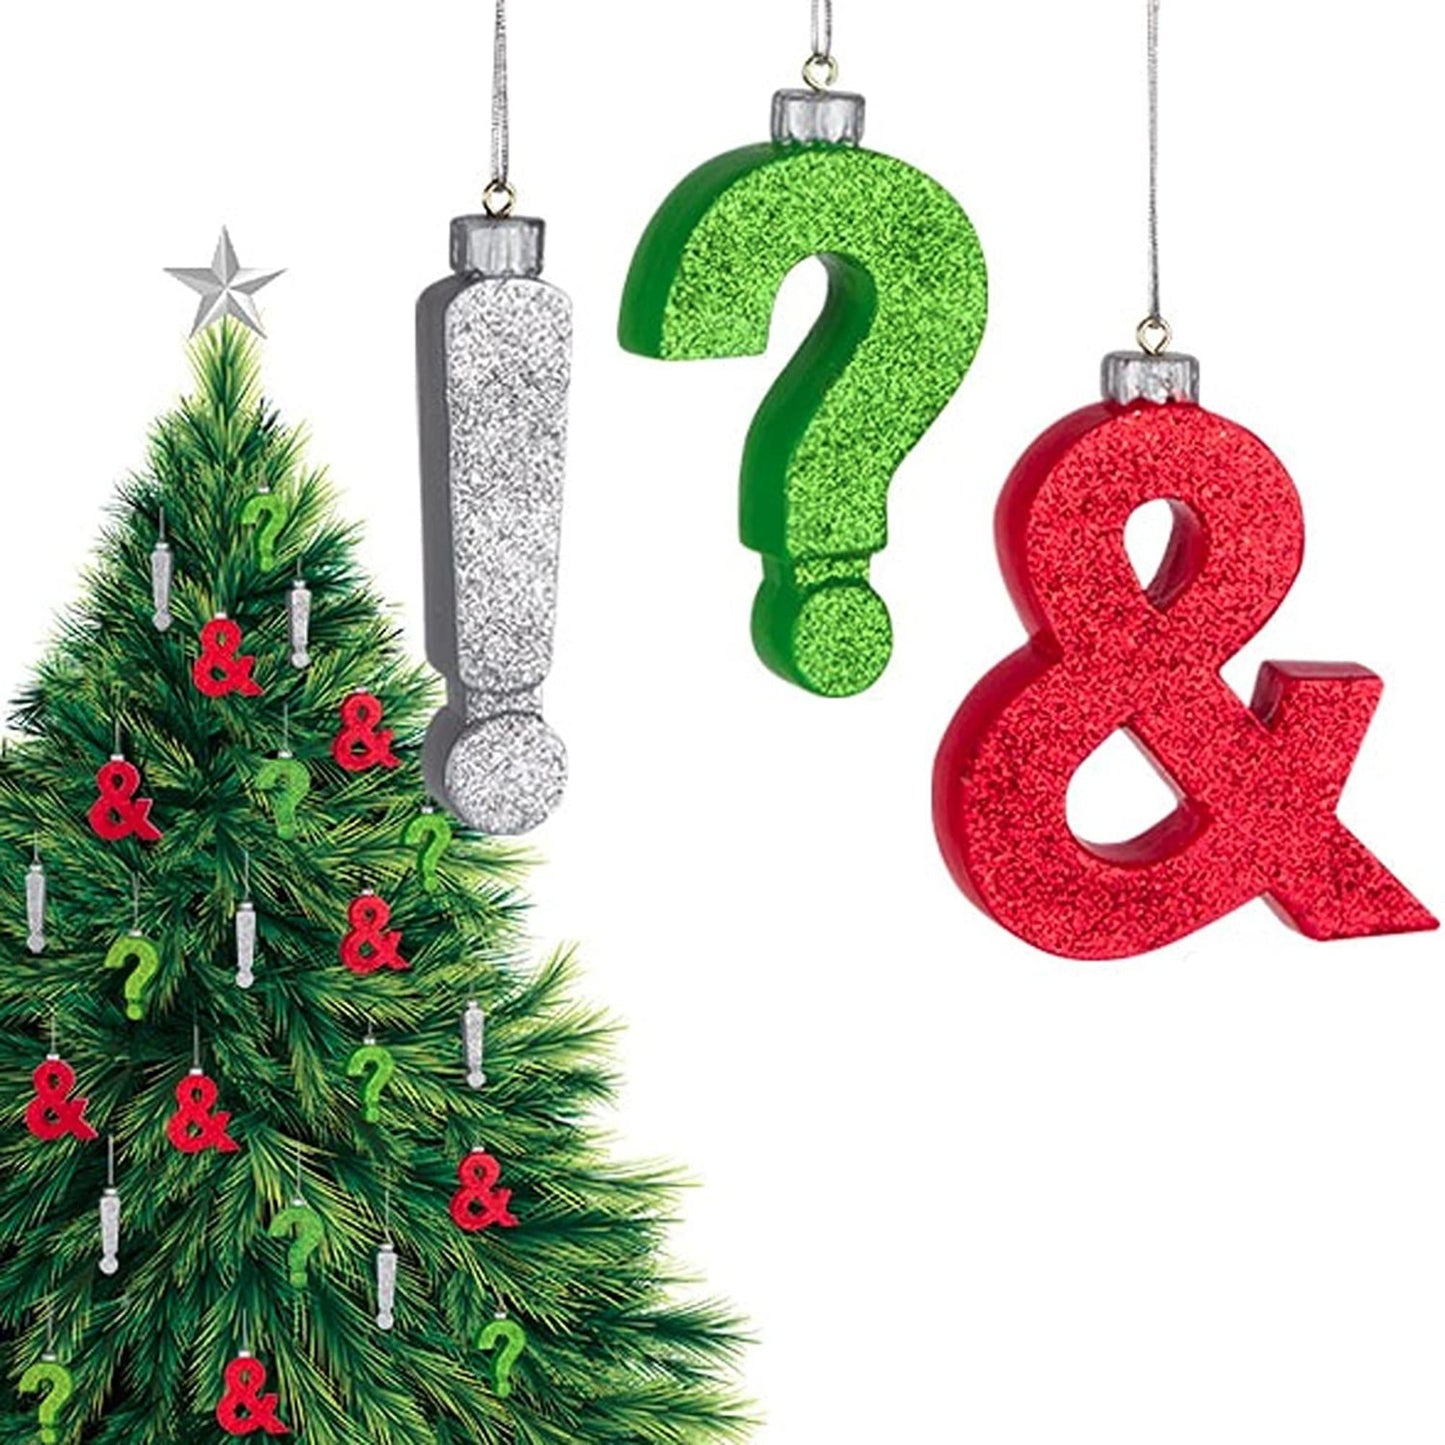 Punctuation Holiday Hanging Ornaments | Boxed Set of 3 | Ampersand, Question Mark and Exclamation Point